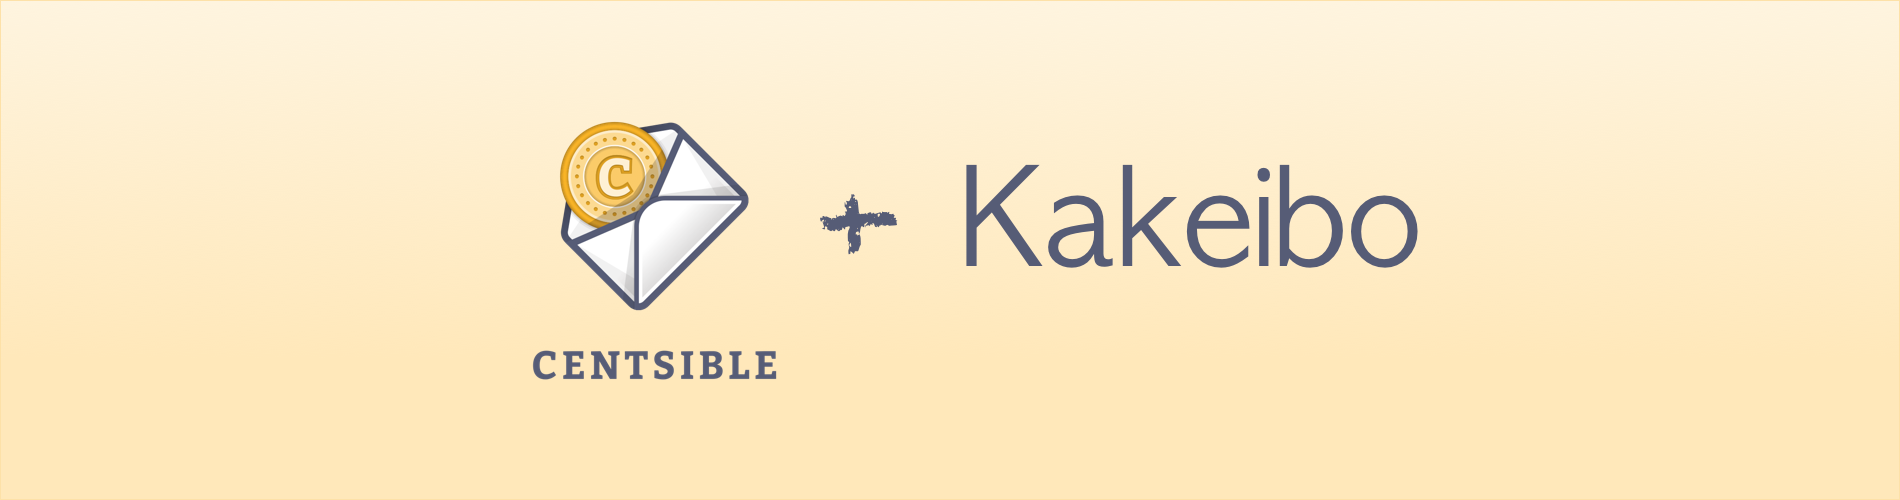 Looking For A Kakeibo App?